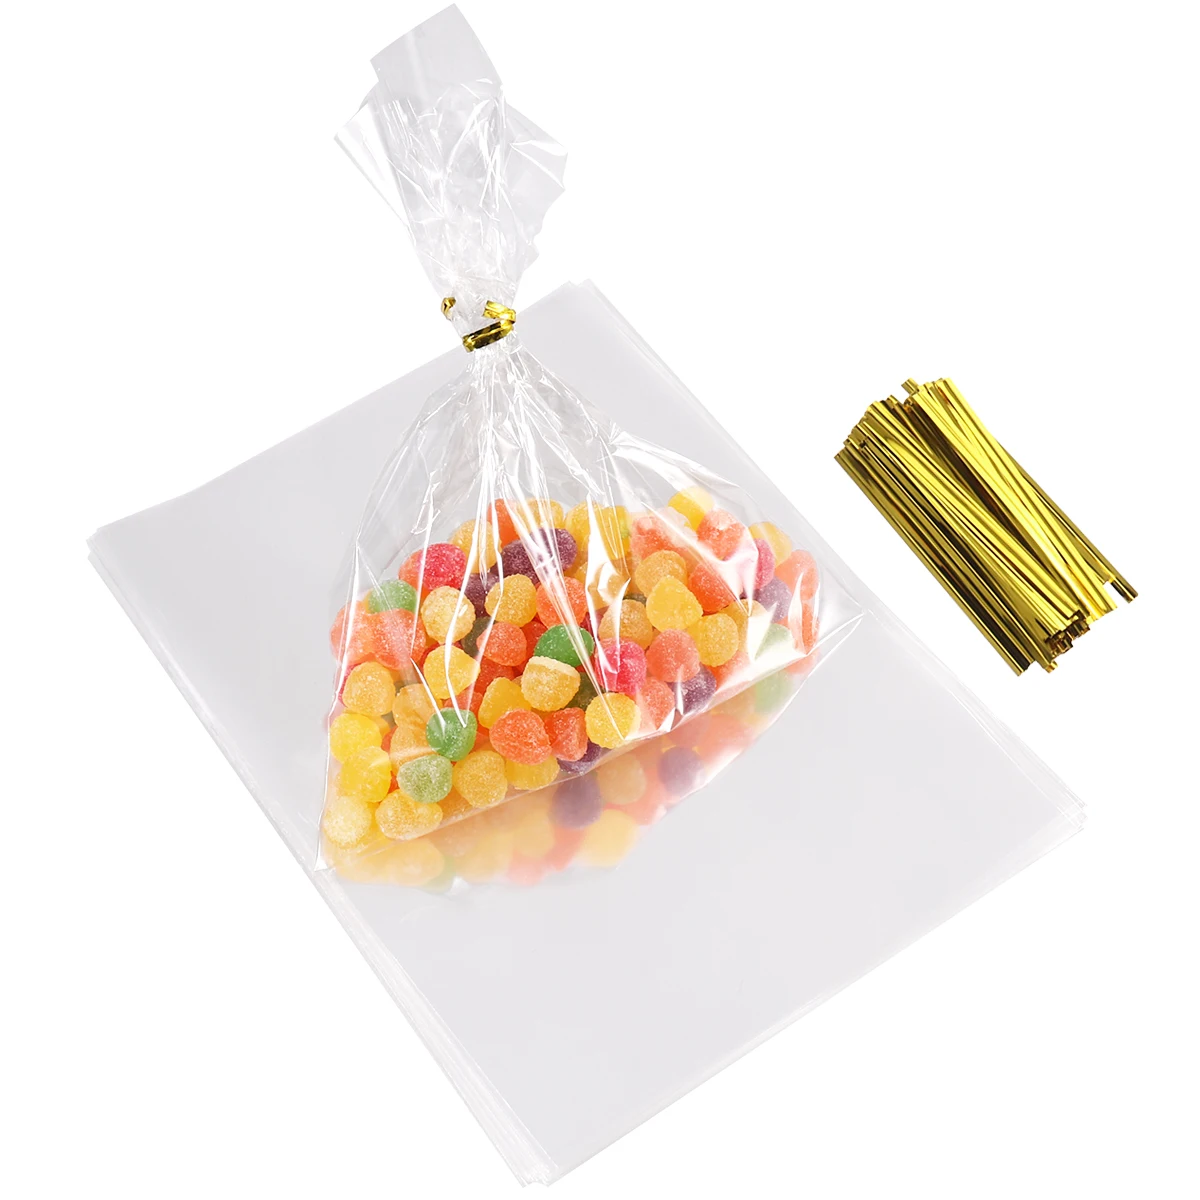 DierCosy 100pcs OPP Clear Bags Multi-Purpose cellophane Bag for Bread Candy soap Biscuits 